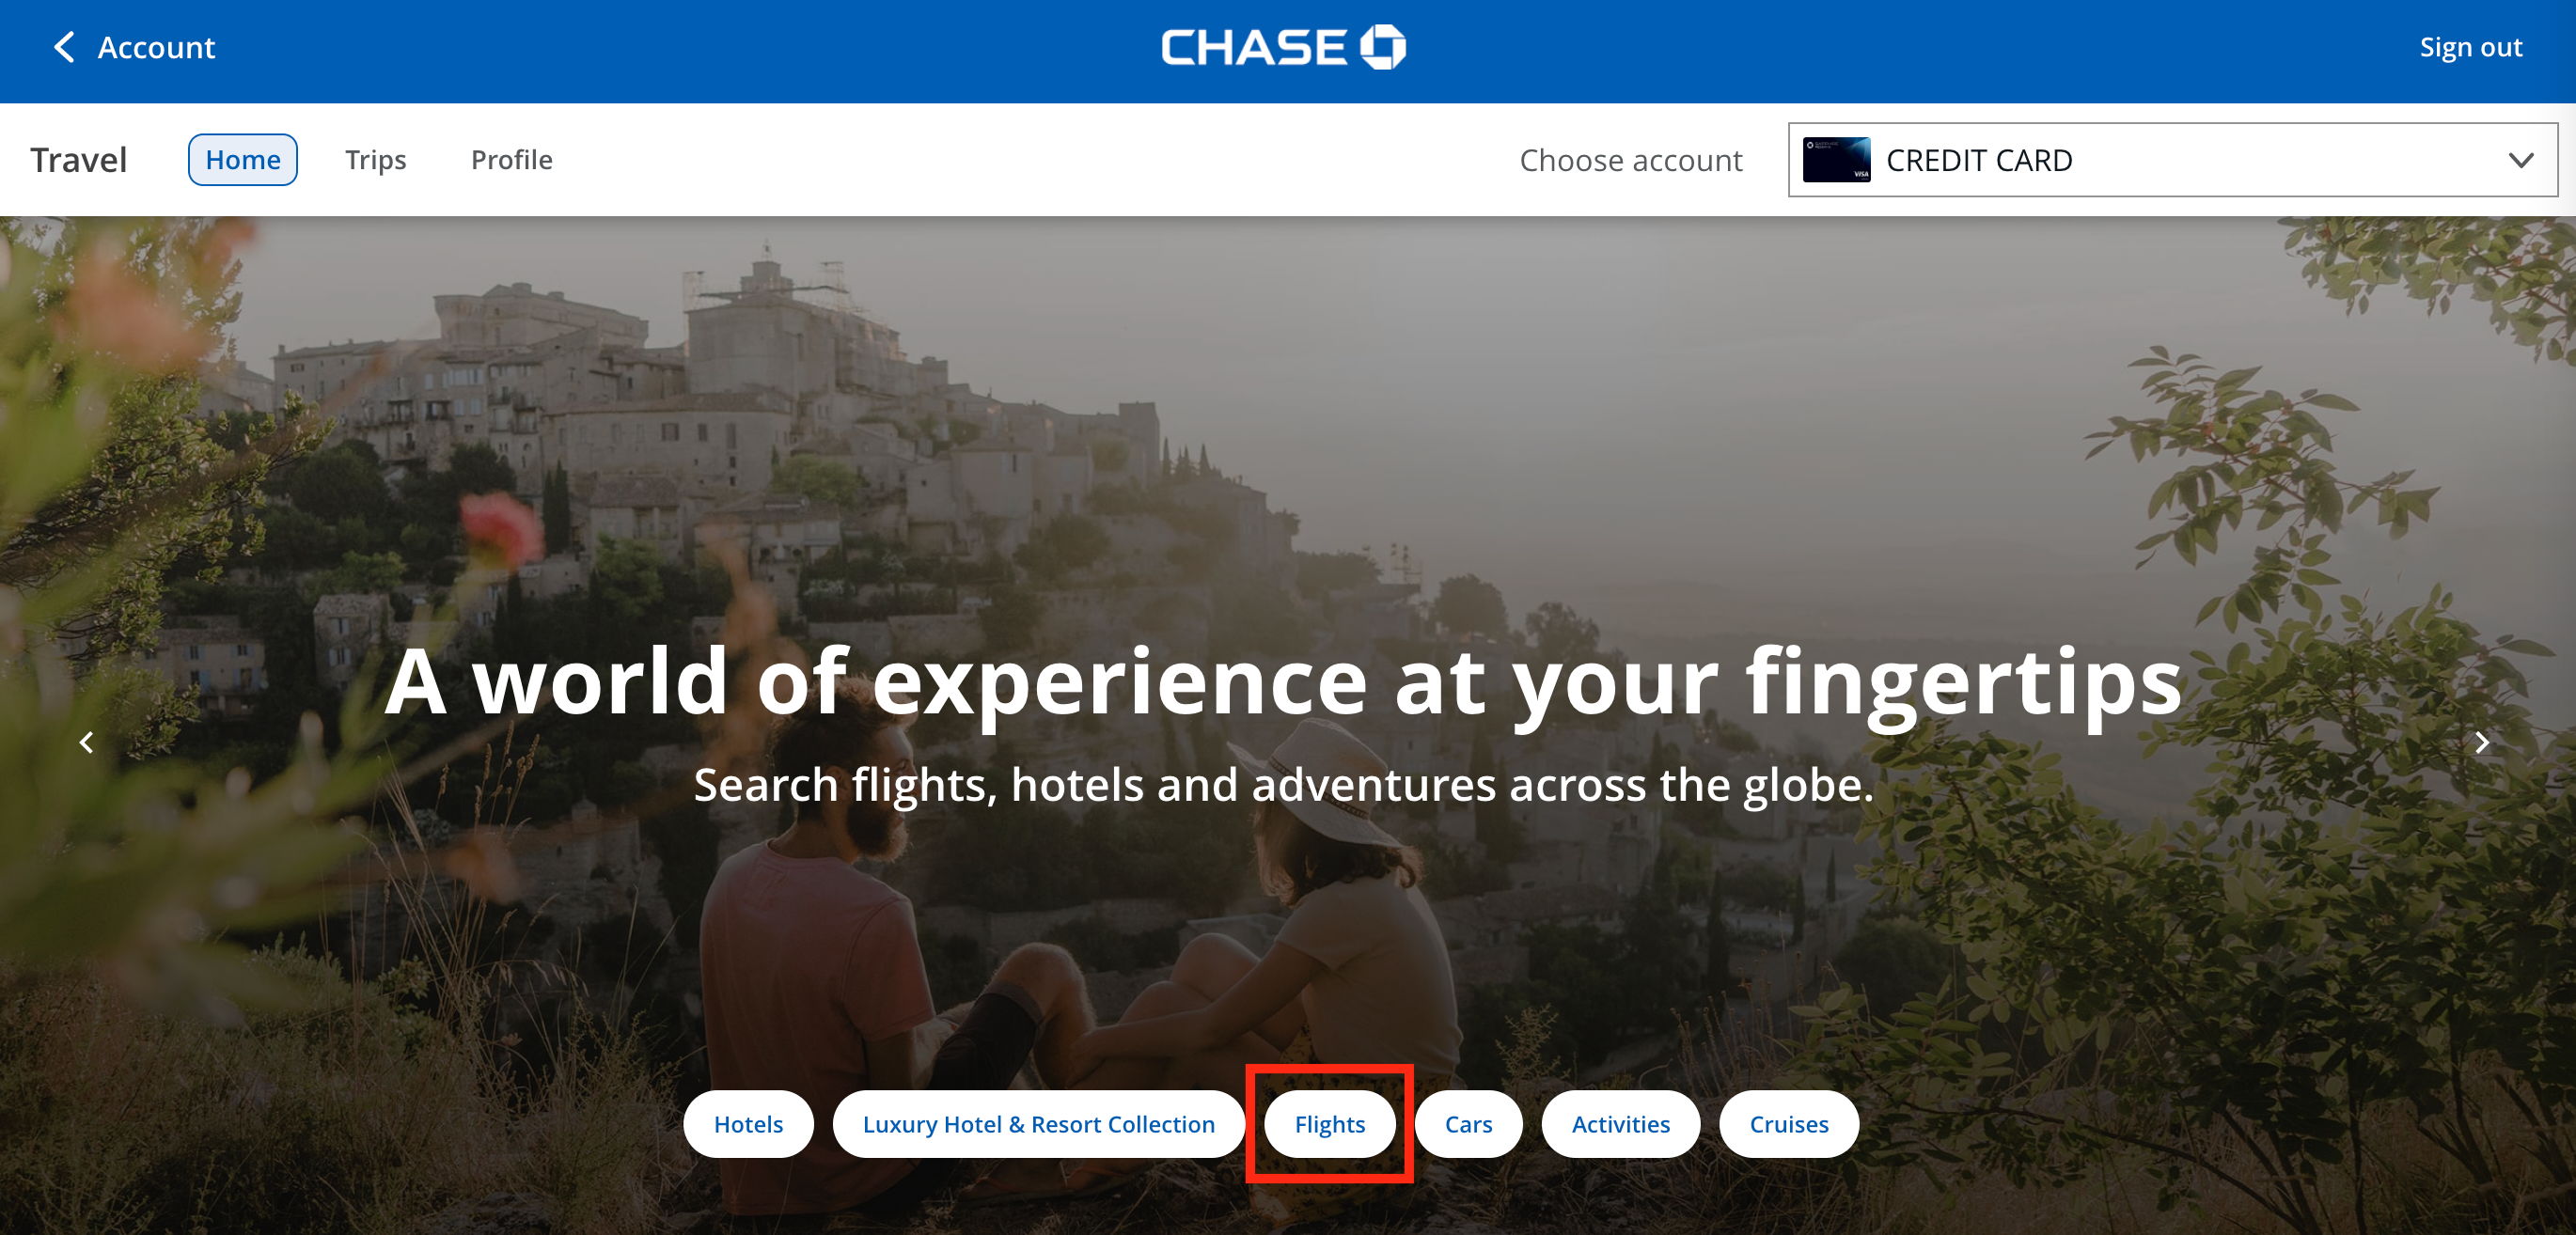 How to Book Hotels with Chase Ultimate Rewards - Travel Freely